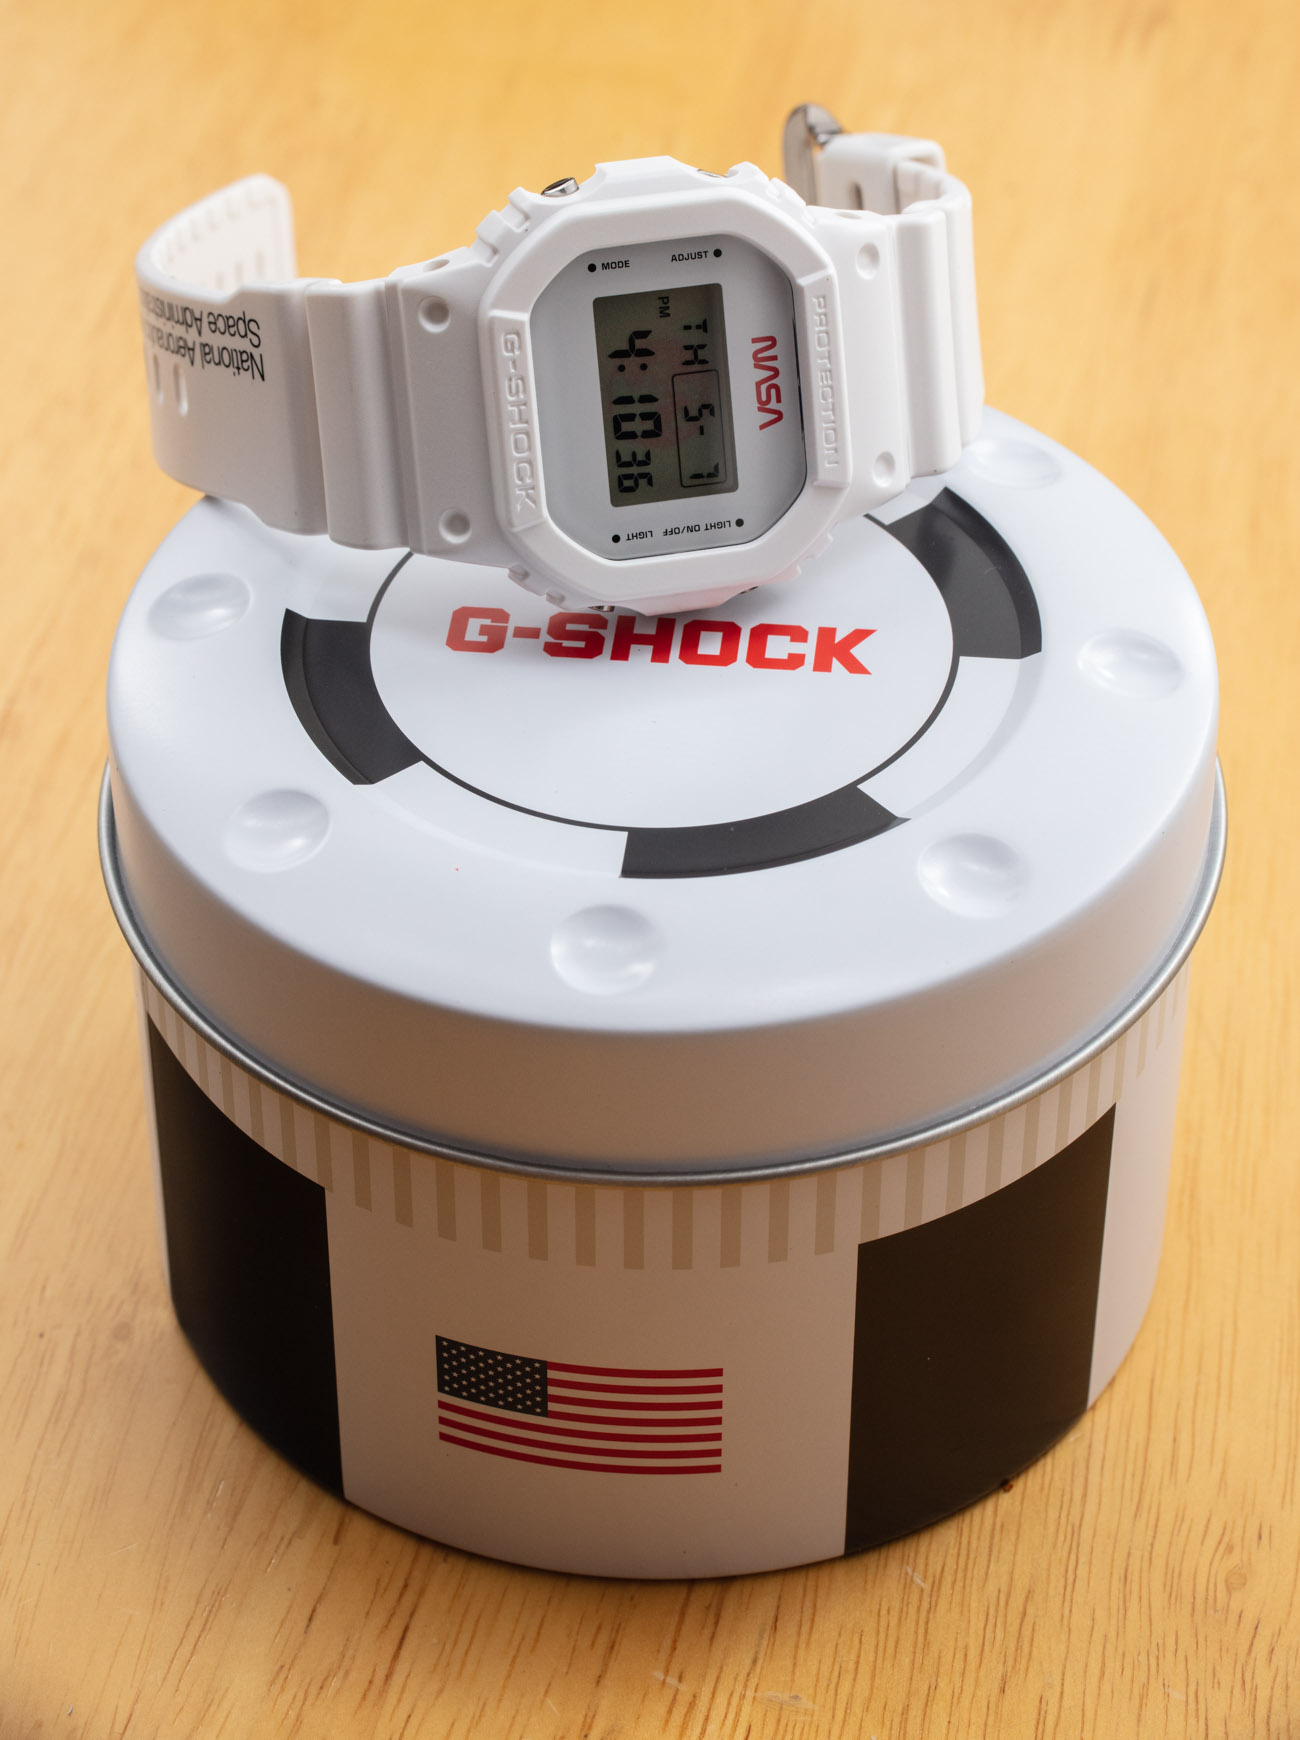 The G-Shock x NASA Limited Edition DW5600 – Professional Watches